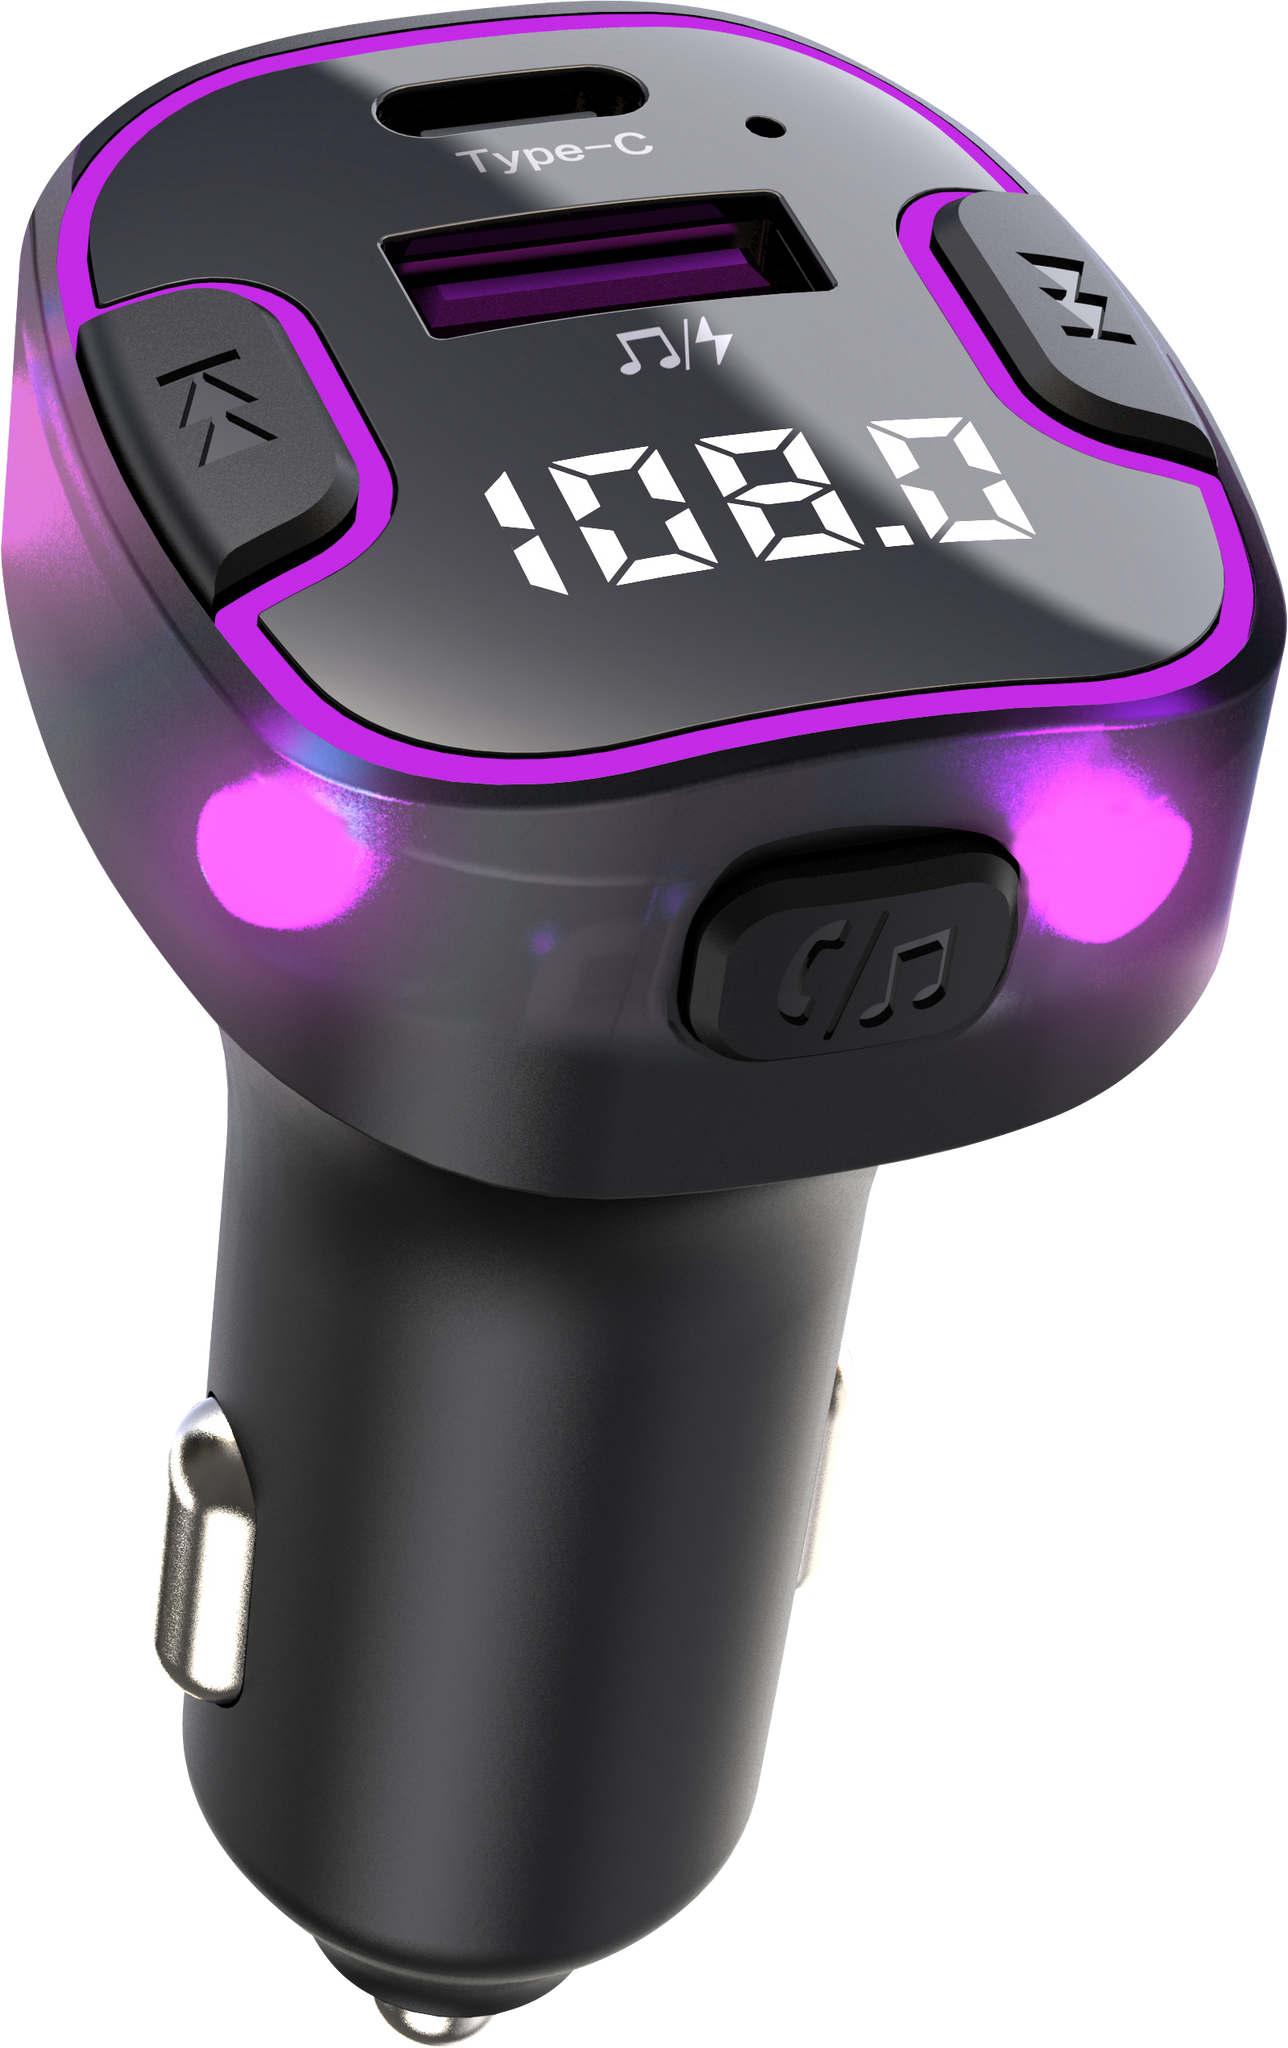 VeeDee Tvara C49 Bluetooth FM Transmitter and Wireless Radio Adapter Car Kit with LED Display, Hands-Free Calling, and Dual USB Charging Ports